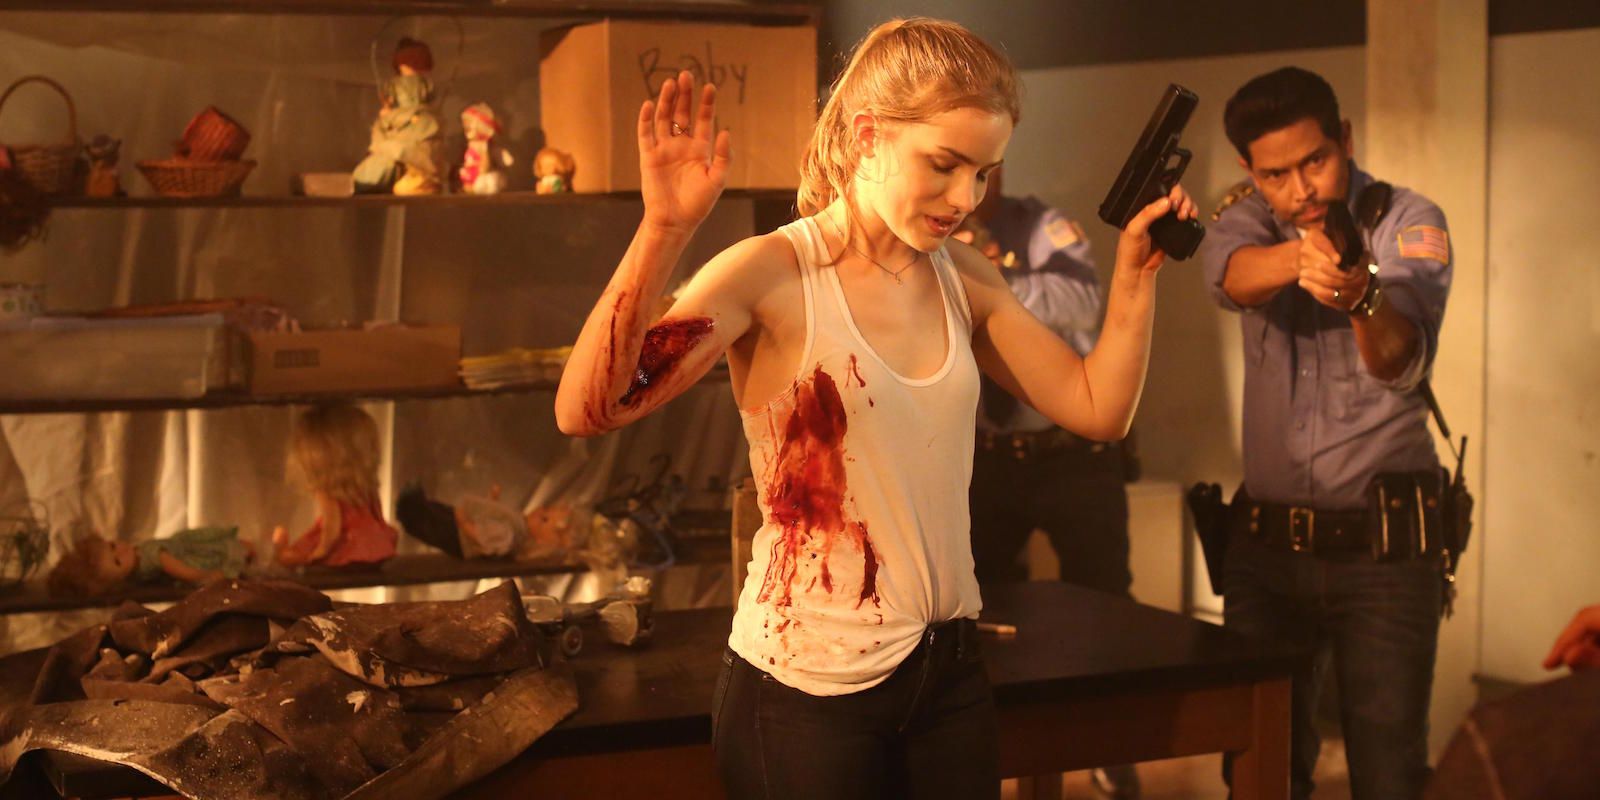 Emma with her hands up and bleeding as cops arrive in Scream